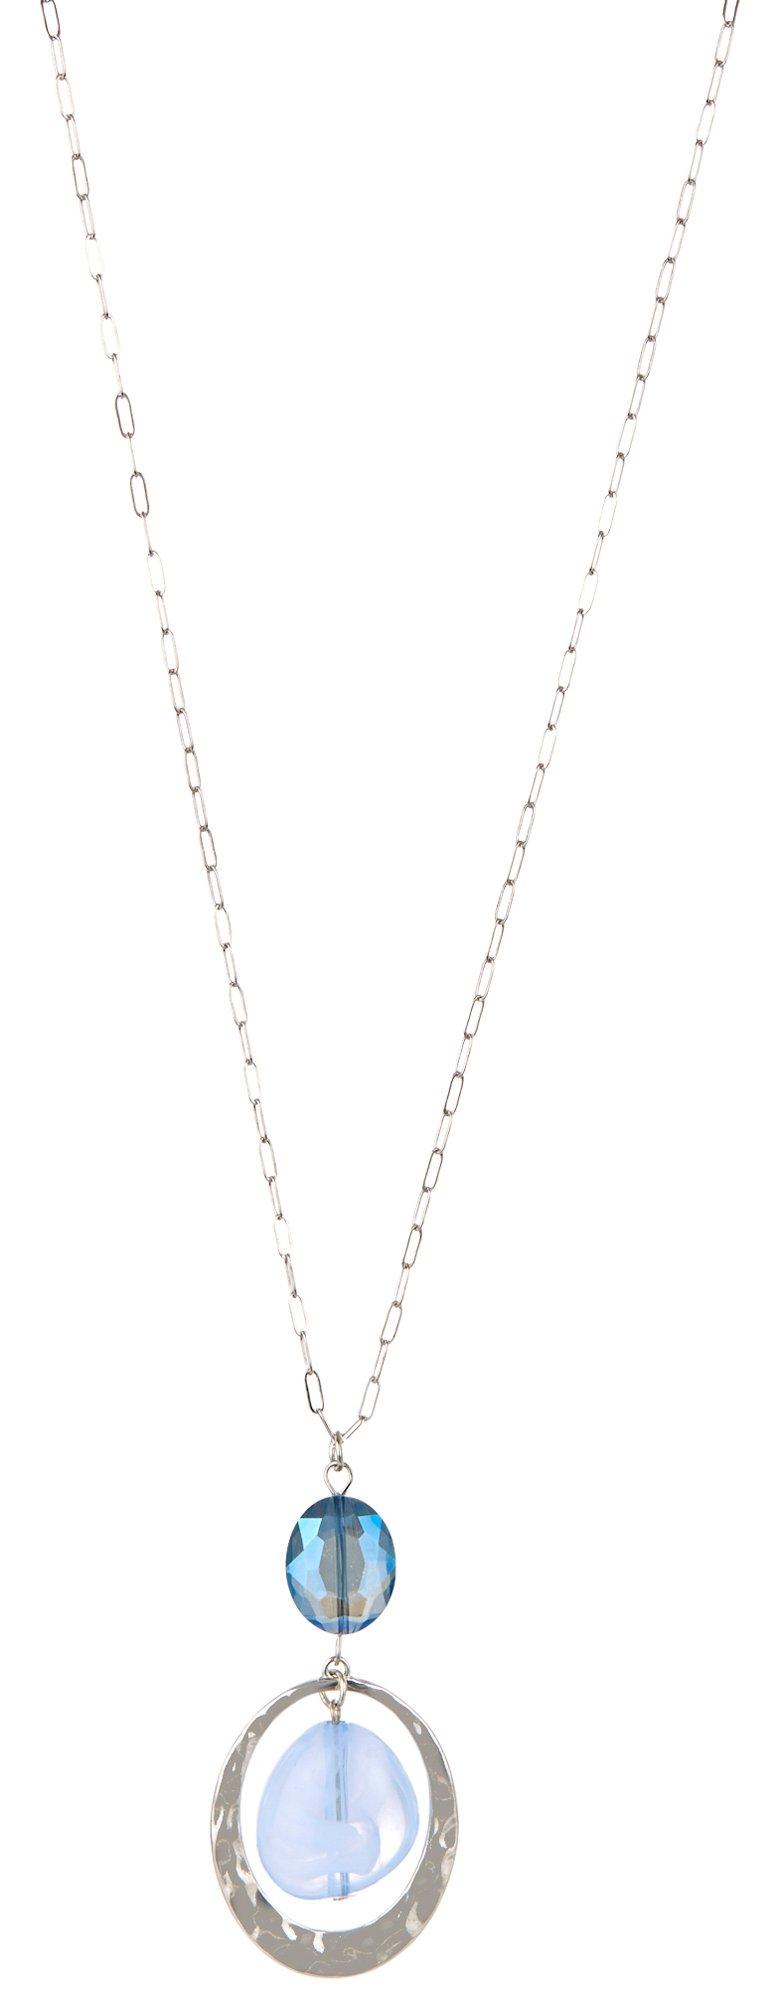 30 In. Double Bead Orbital Chain Necklace